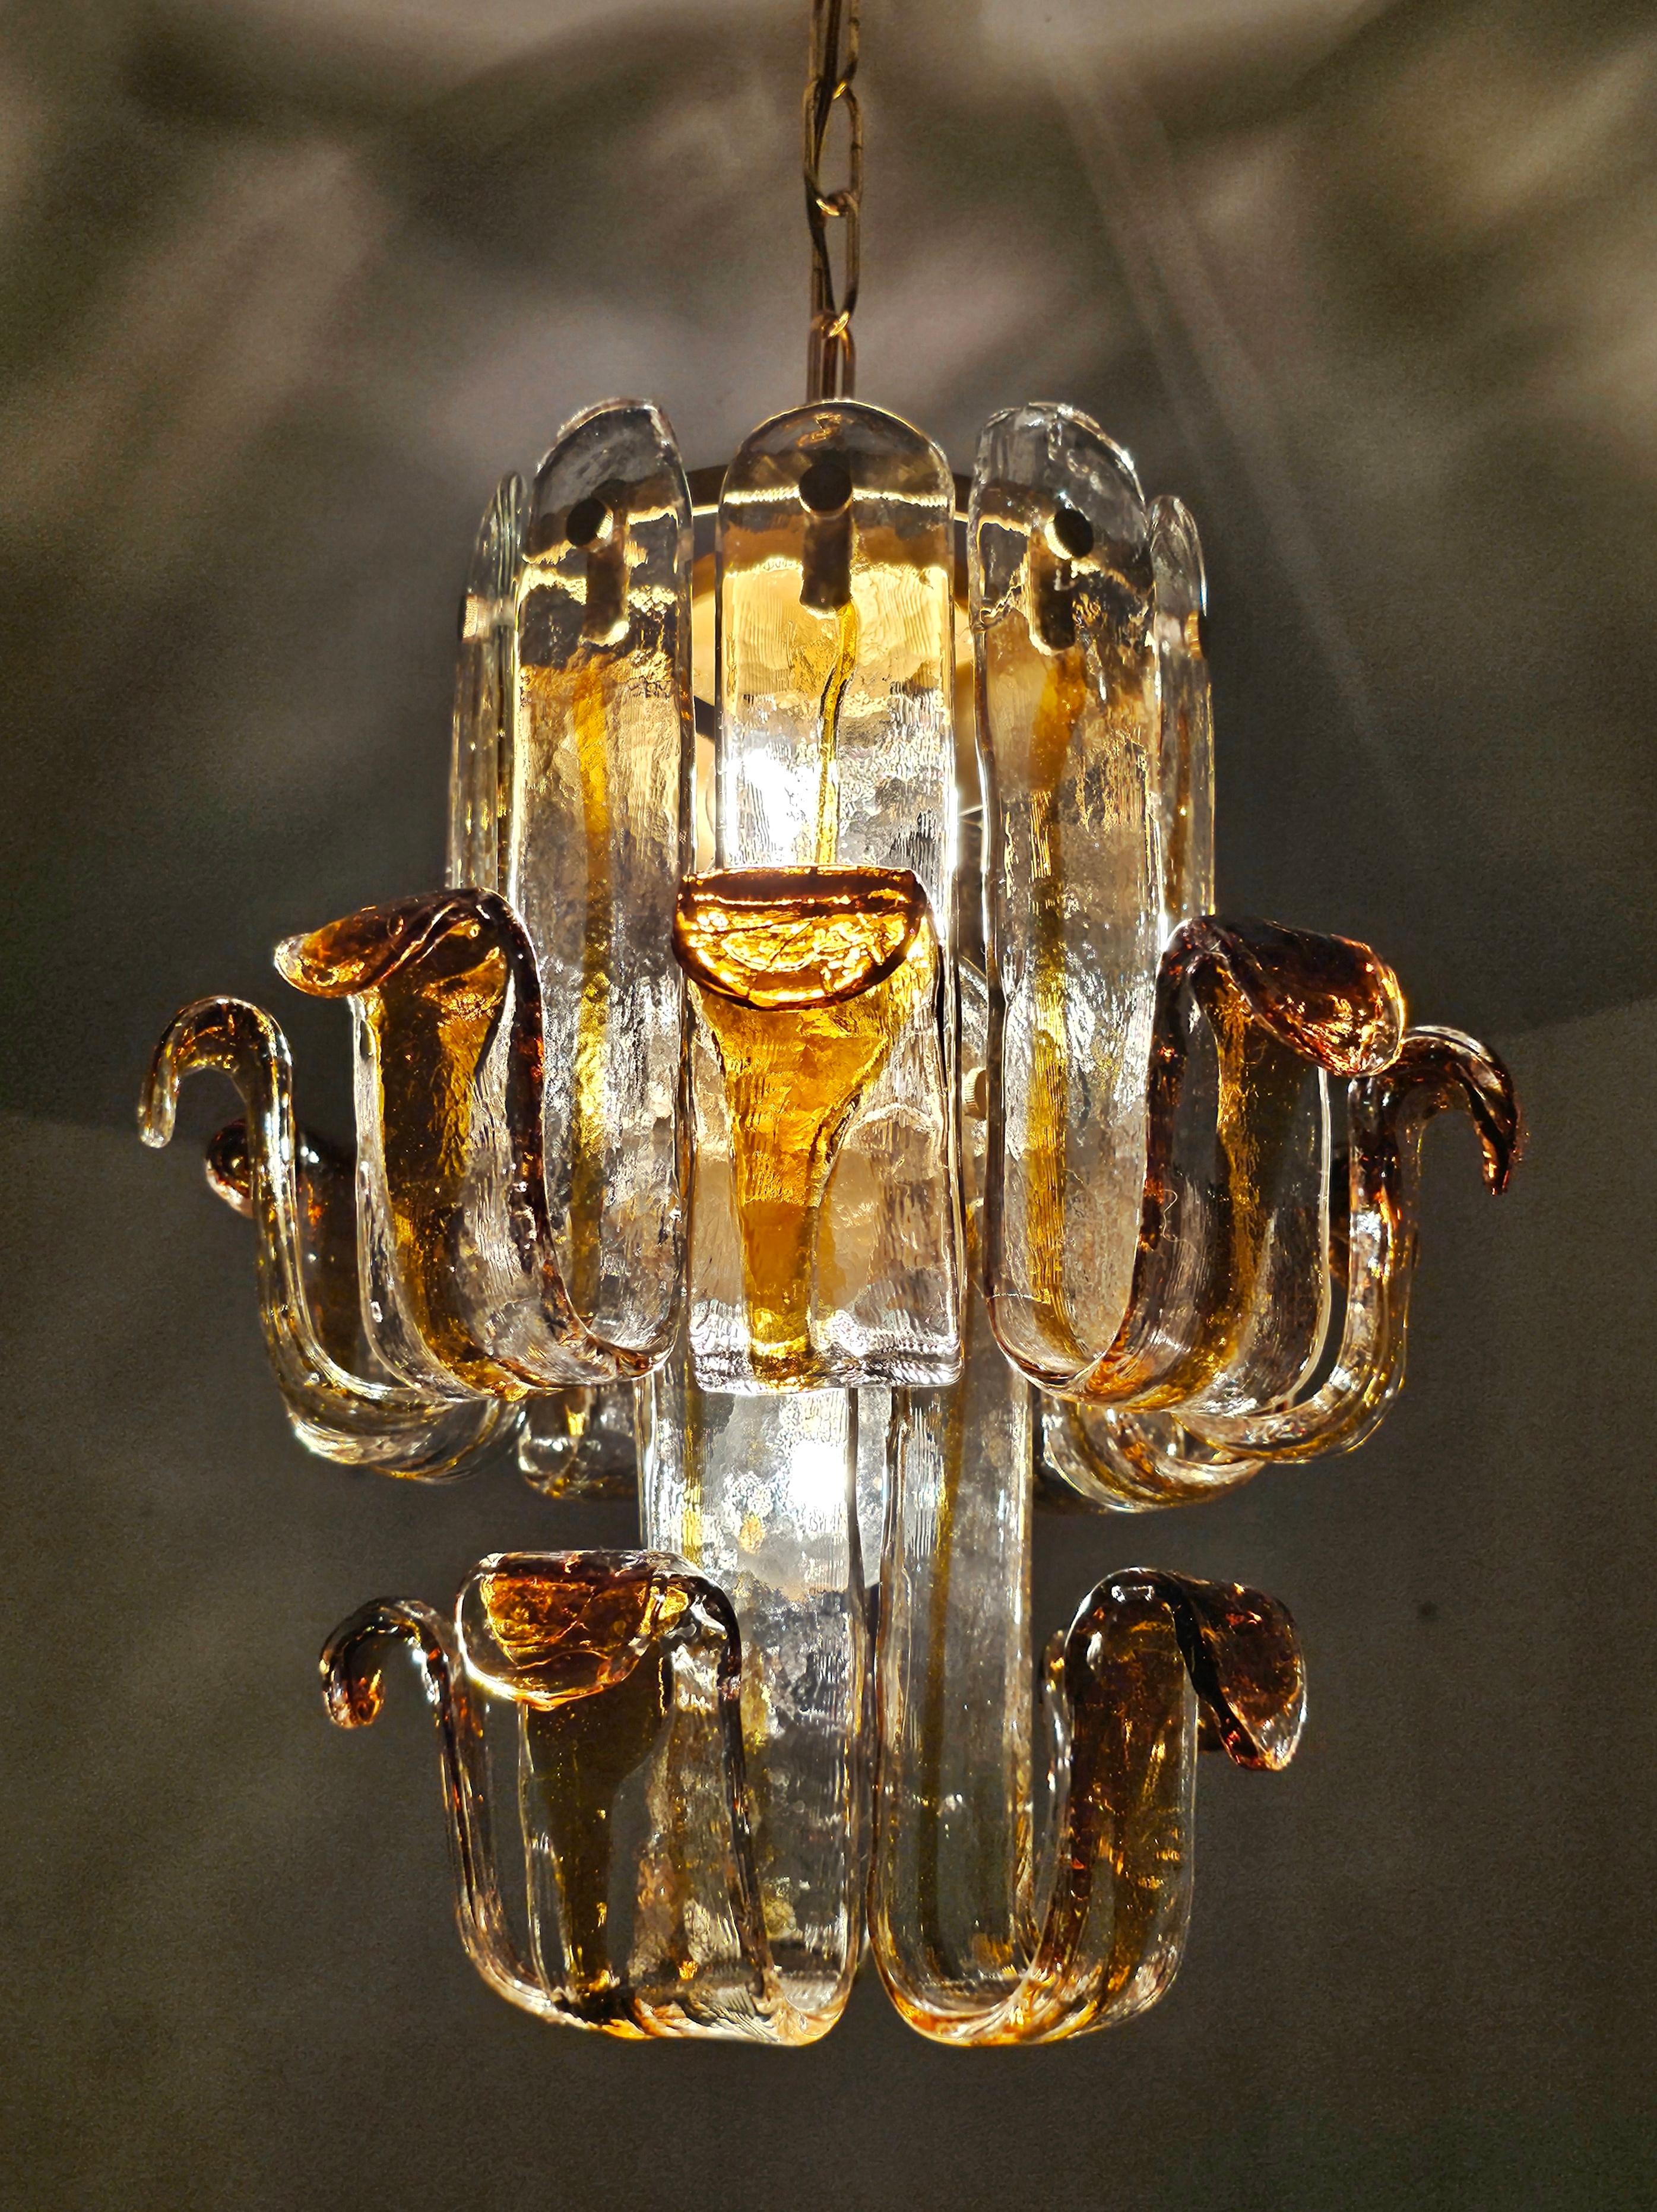 In this listing you will find a very rare Mid Century Modern chandelier shaped as a blooming flower done in amber and clear Murano glass. The glass plates are attached to a brass fixture. The chandelier is designed by Toni Zuccheri for AV Mazzega.